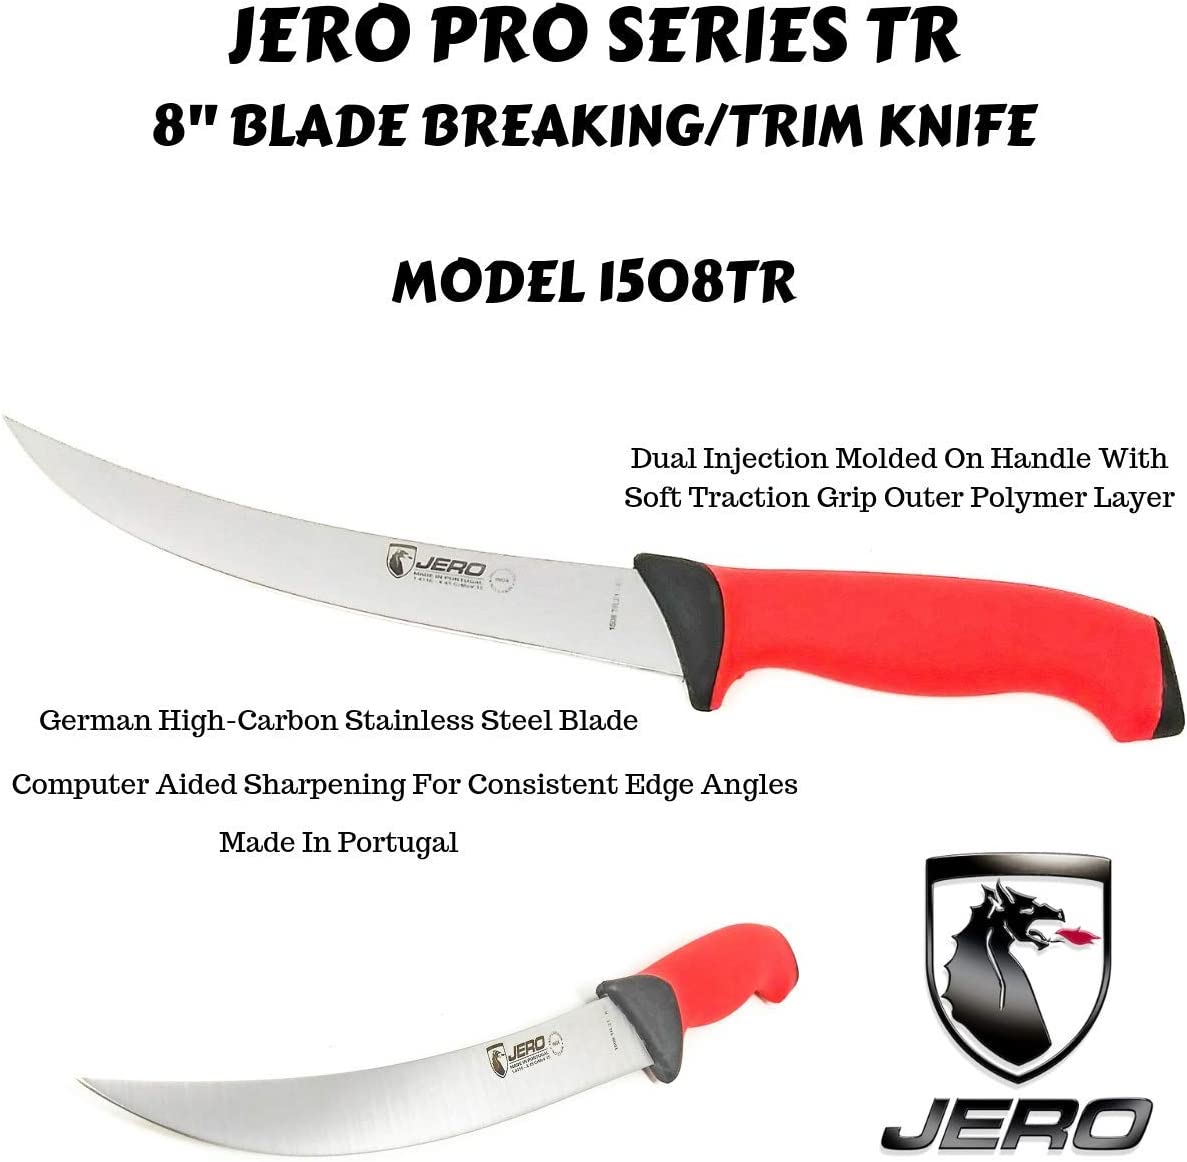 Jero Pro Series TR Breaking and Trim Knife - 8 Inch  specifications